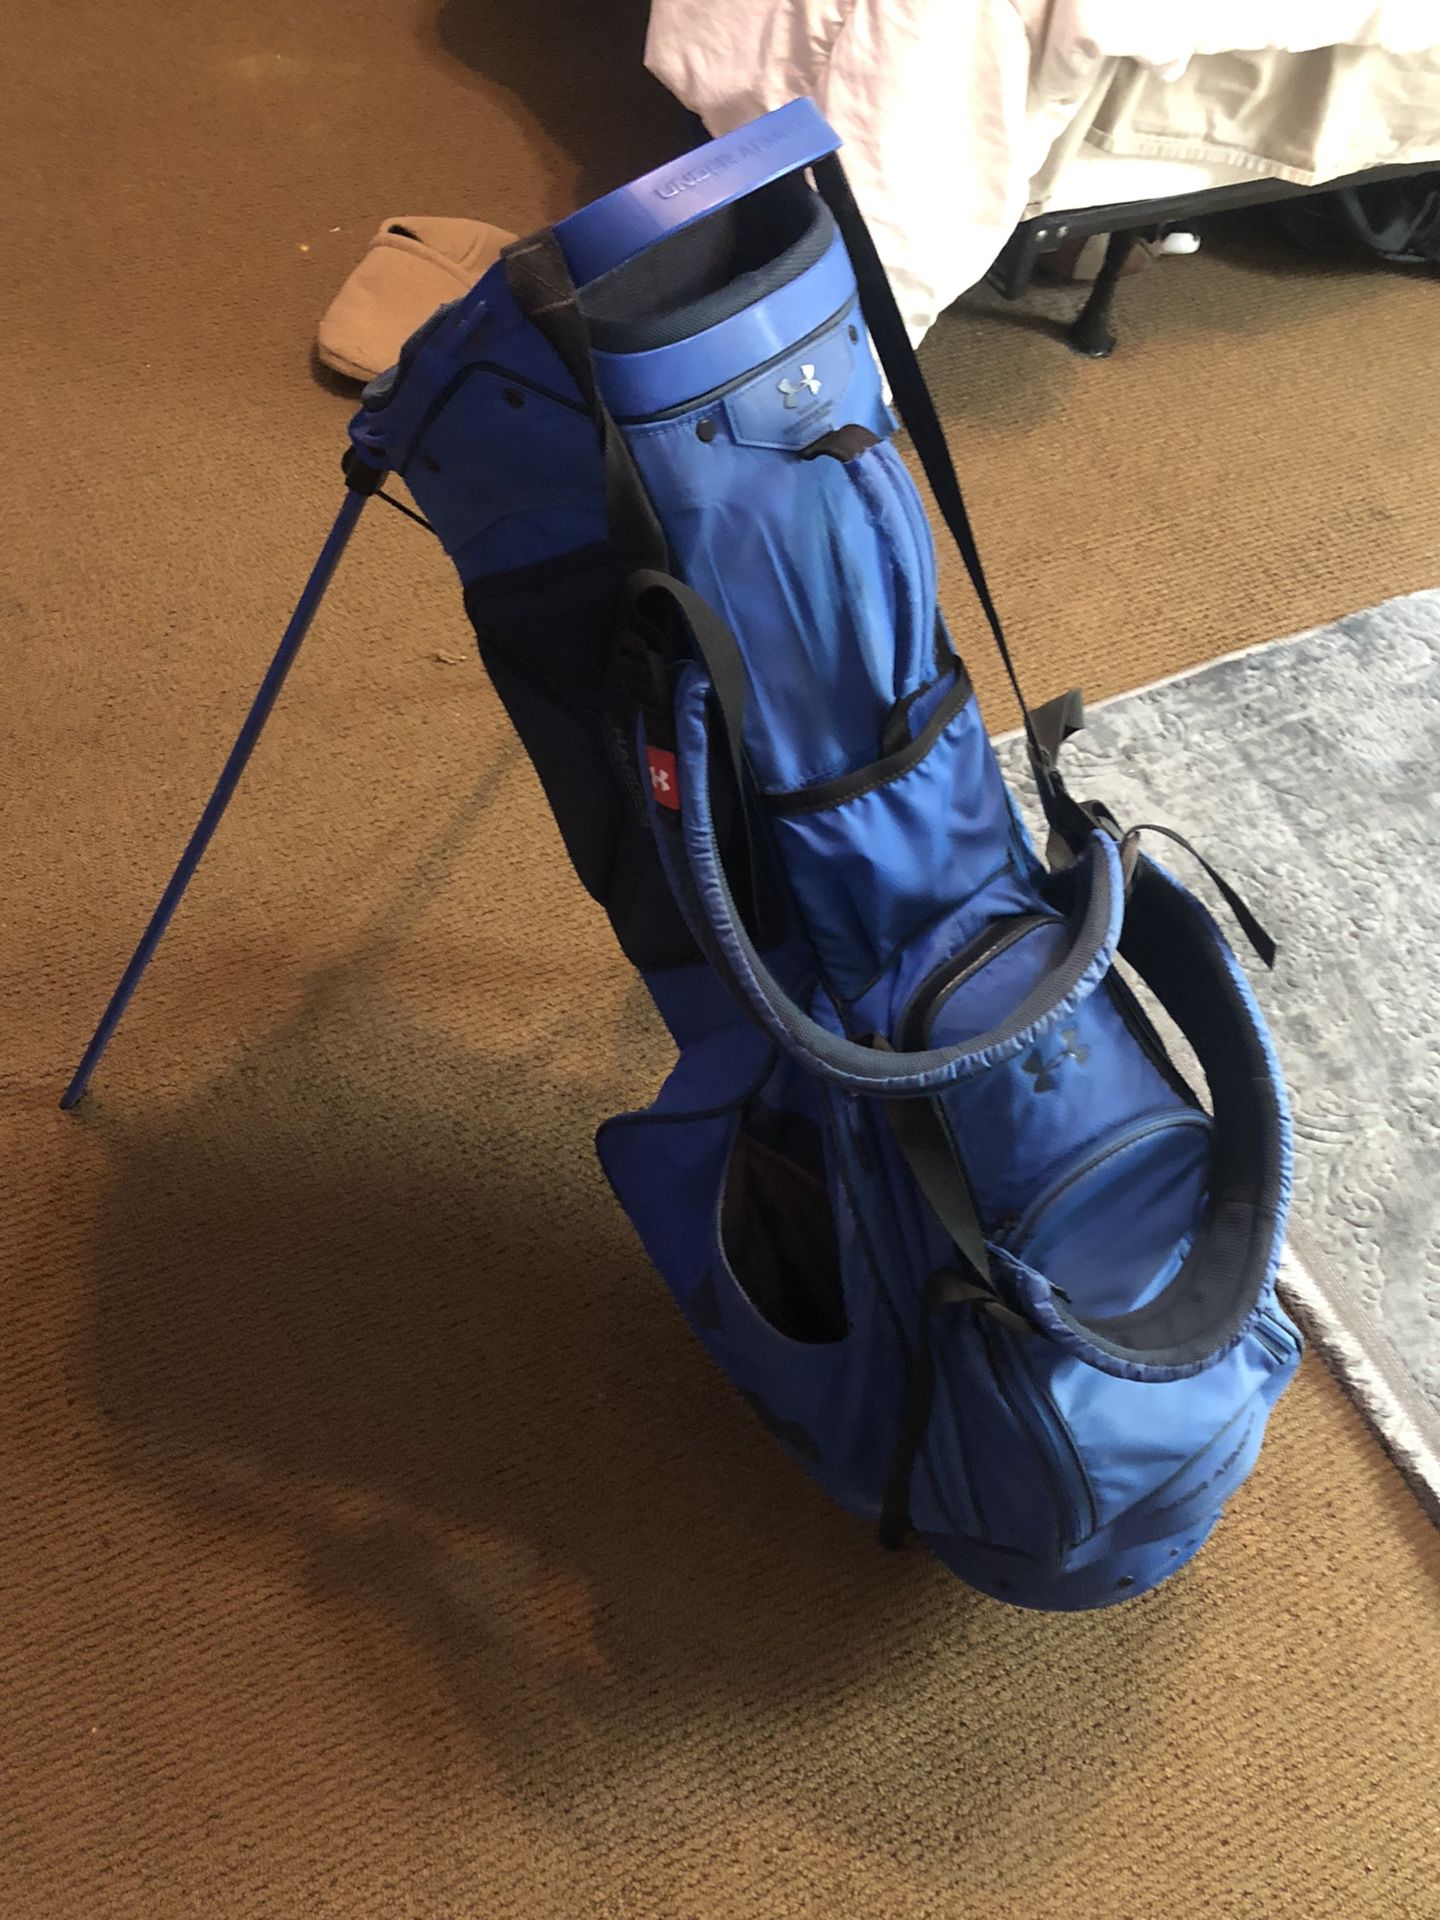 Ghost Golf Bag for Sale in San Antonio, TX - OfferUp